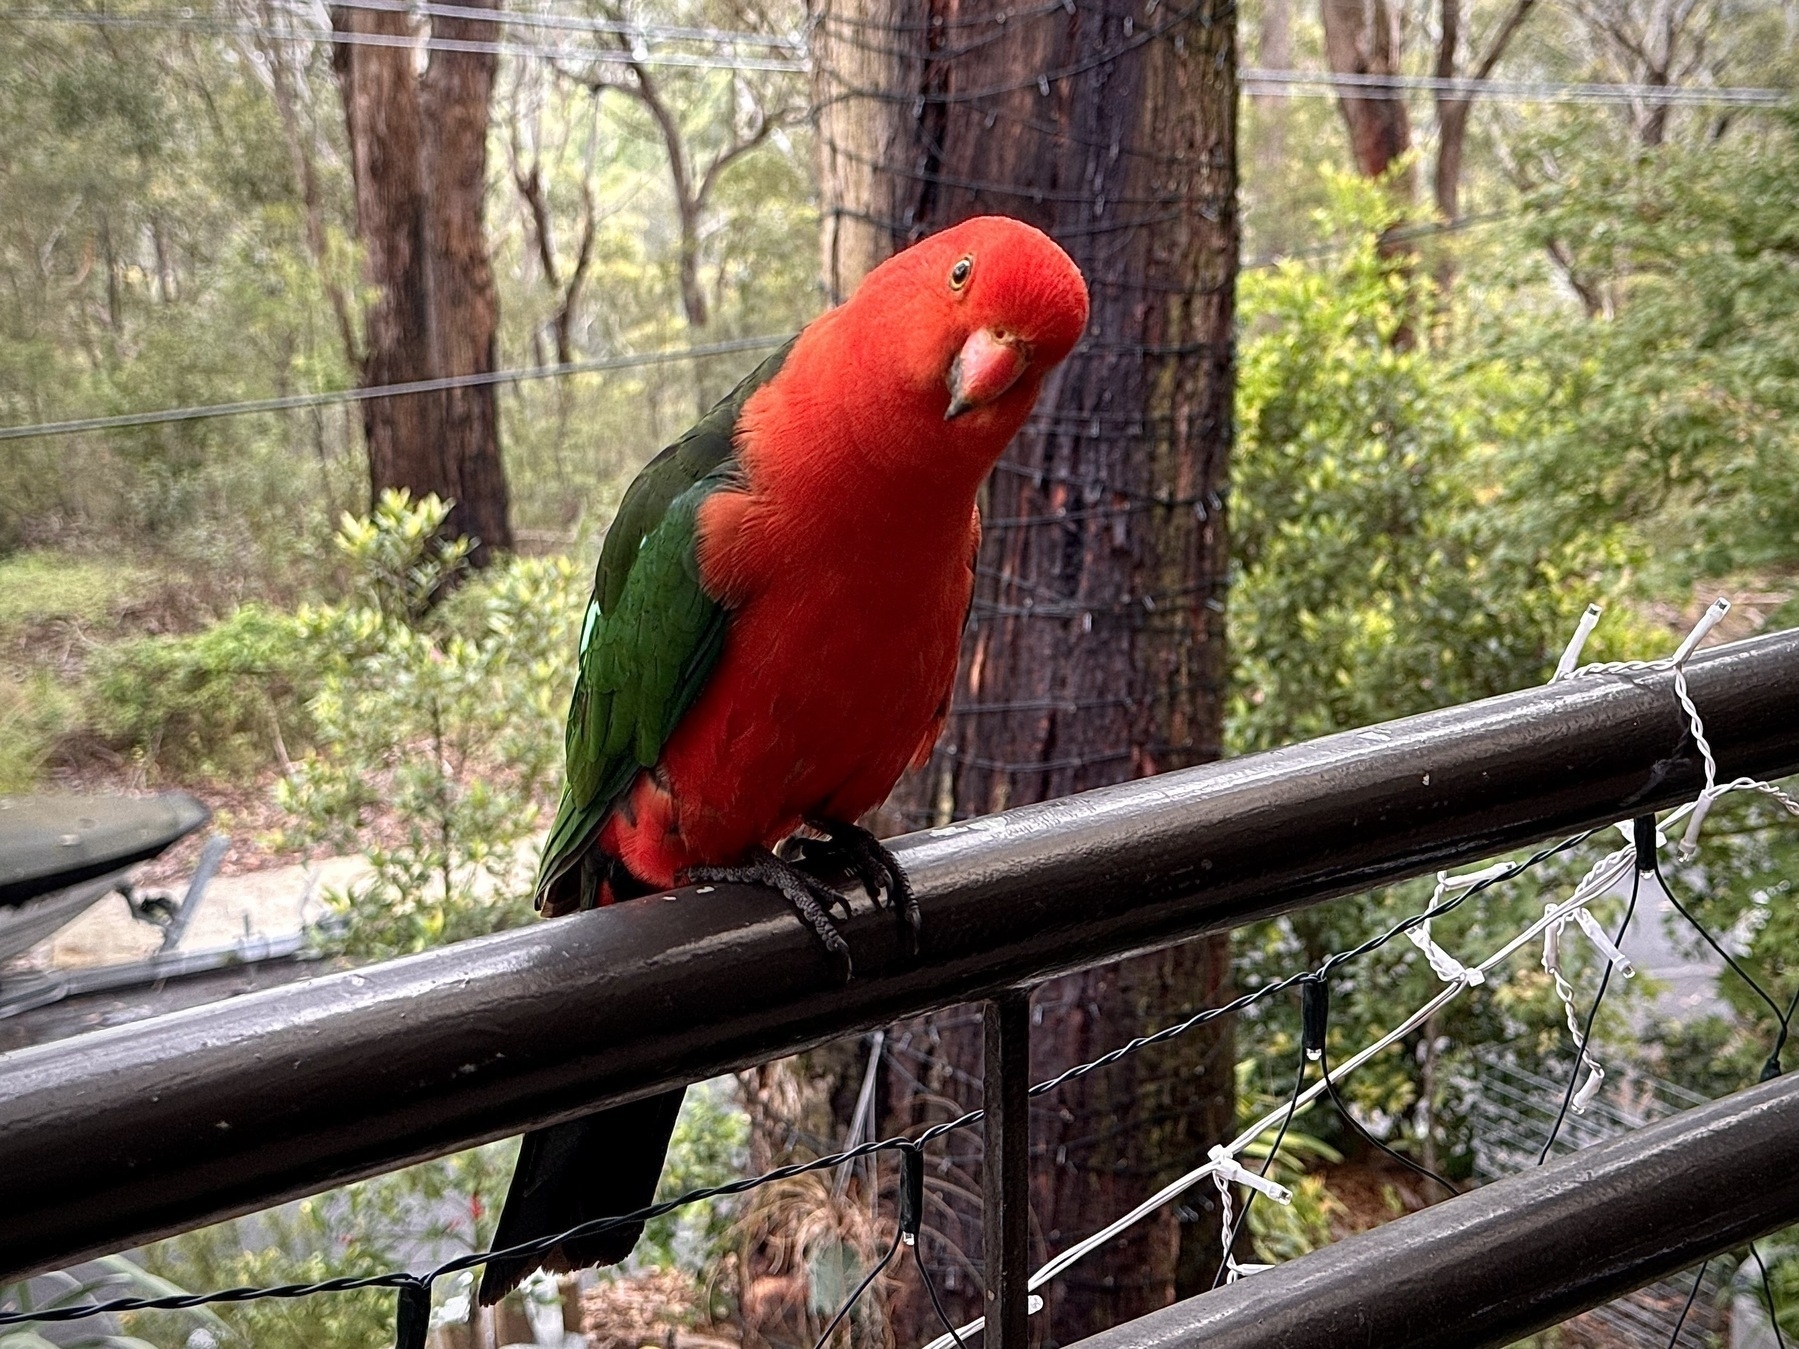 A perplexed red and green parrot sitting on the railing of a second story verandah, eucalypt forrest in the background.